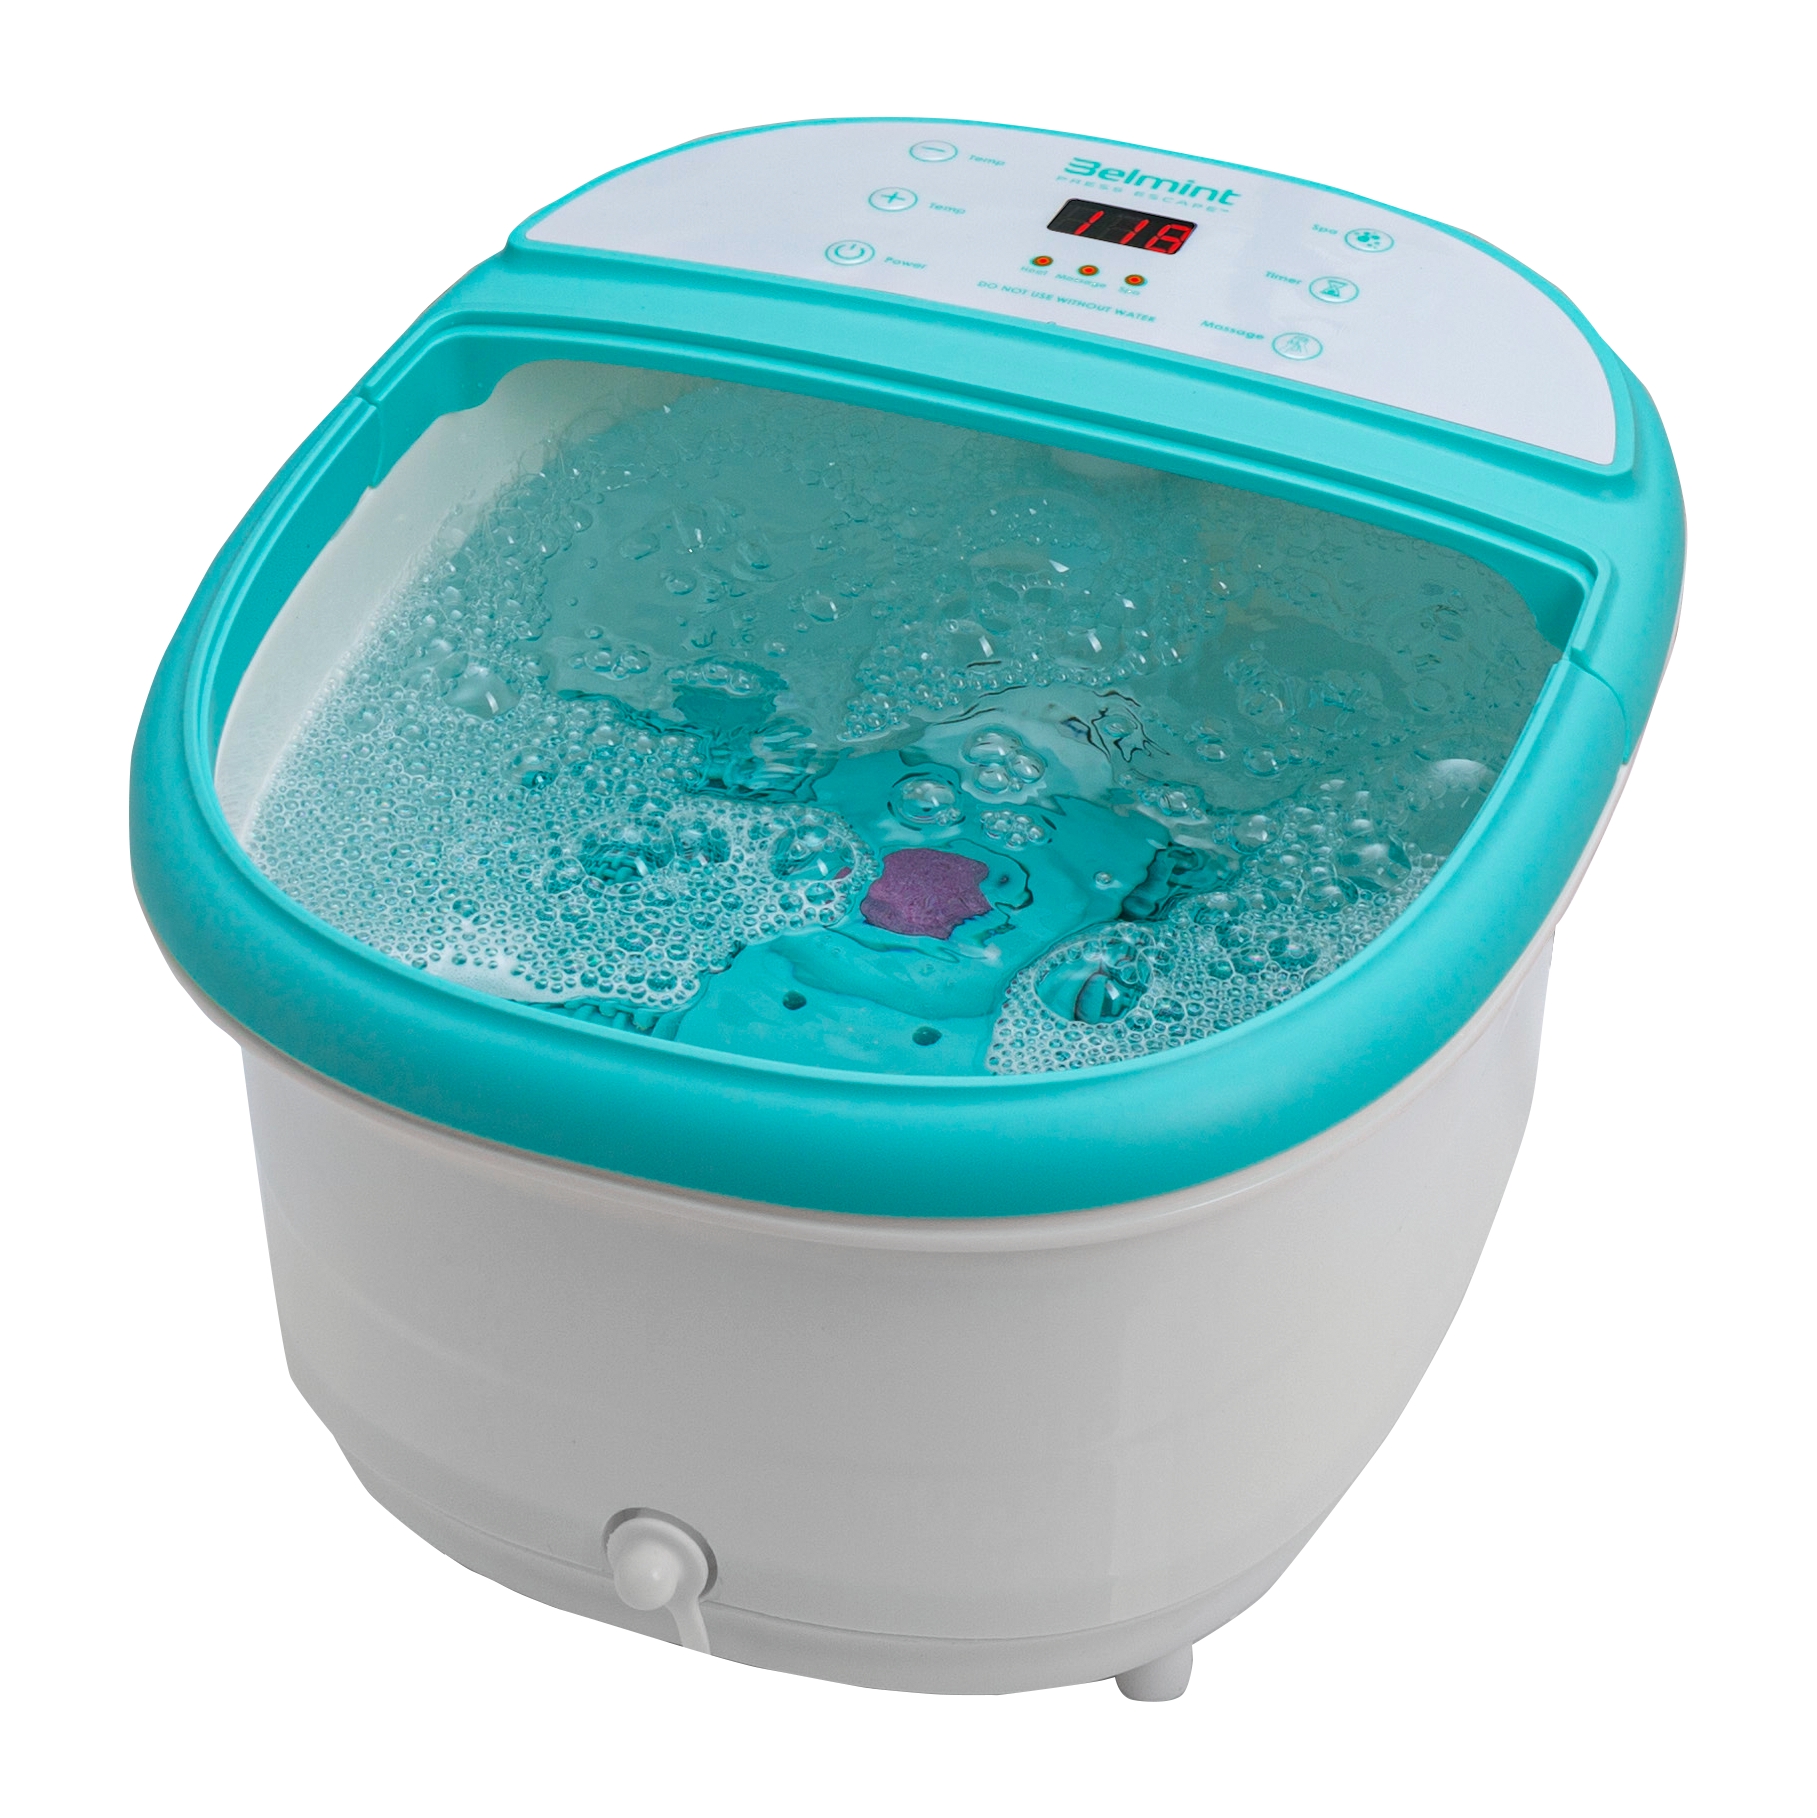 Belmint Foot Spa Bath Massager with Heat, 6 x Pressure Node Rollers, Bubbles, Foot Soaking Tub - image 1 of 8